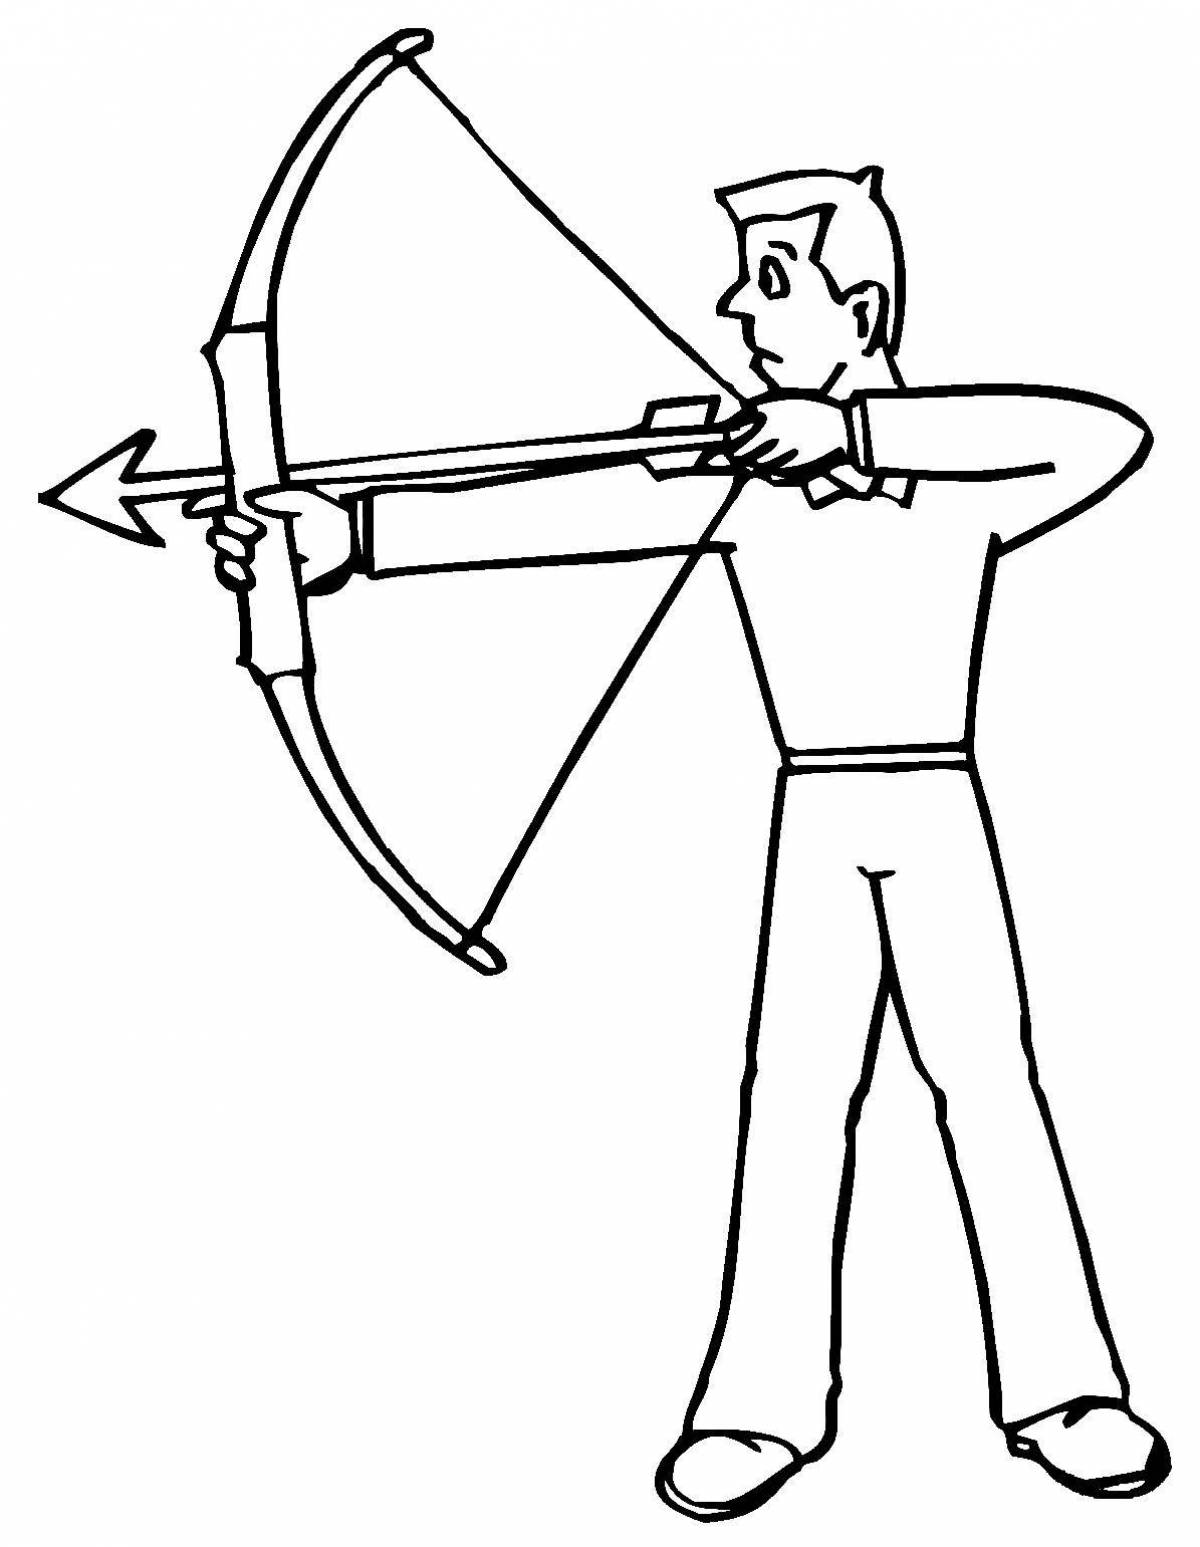 Heroic archer coloring page